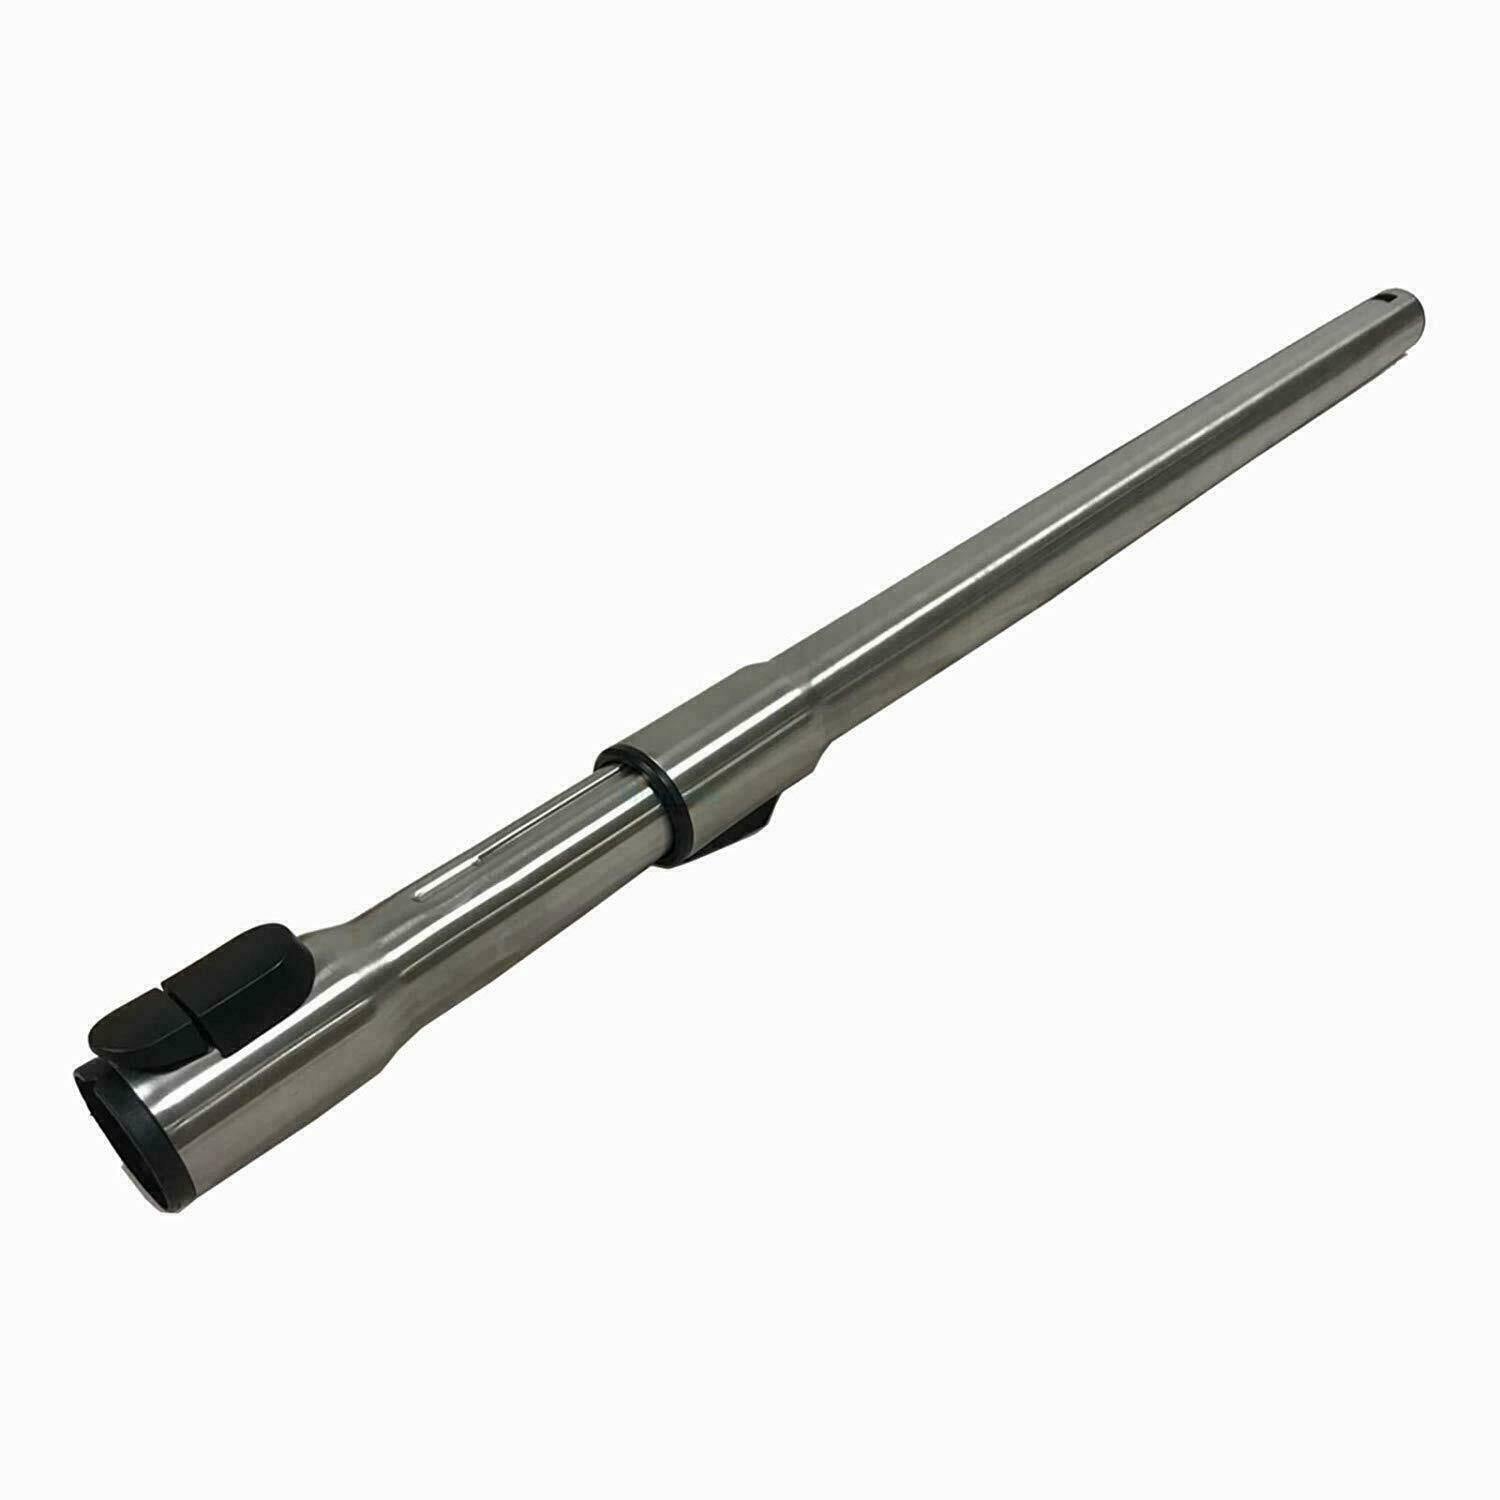 Locking Telescopic Wand Extension Tube Pipe Rod For Miele Vacuum Cleaner Handy Sparesbarn